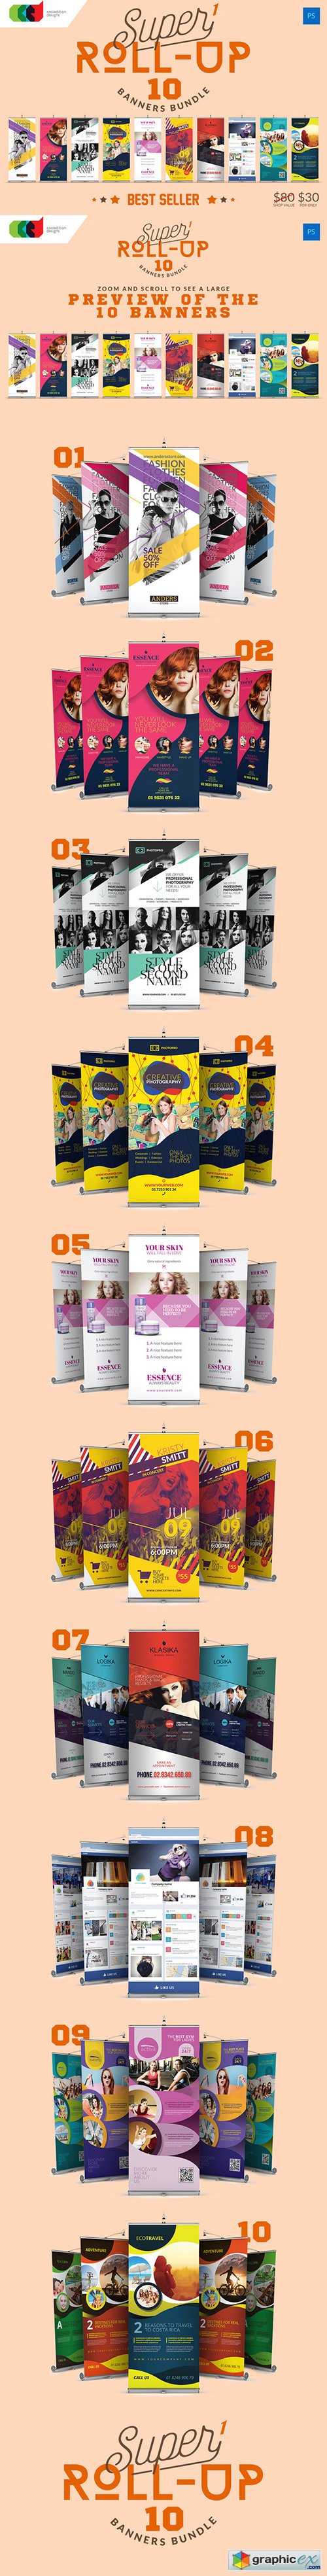 Super 1 - Roll-Up Banners Bundle